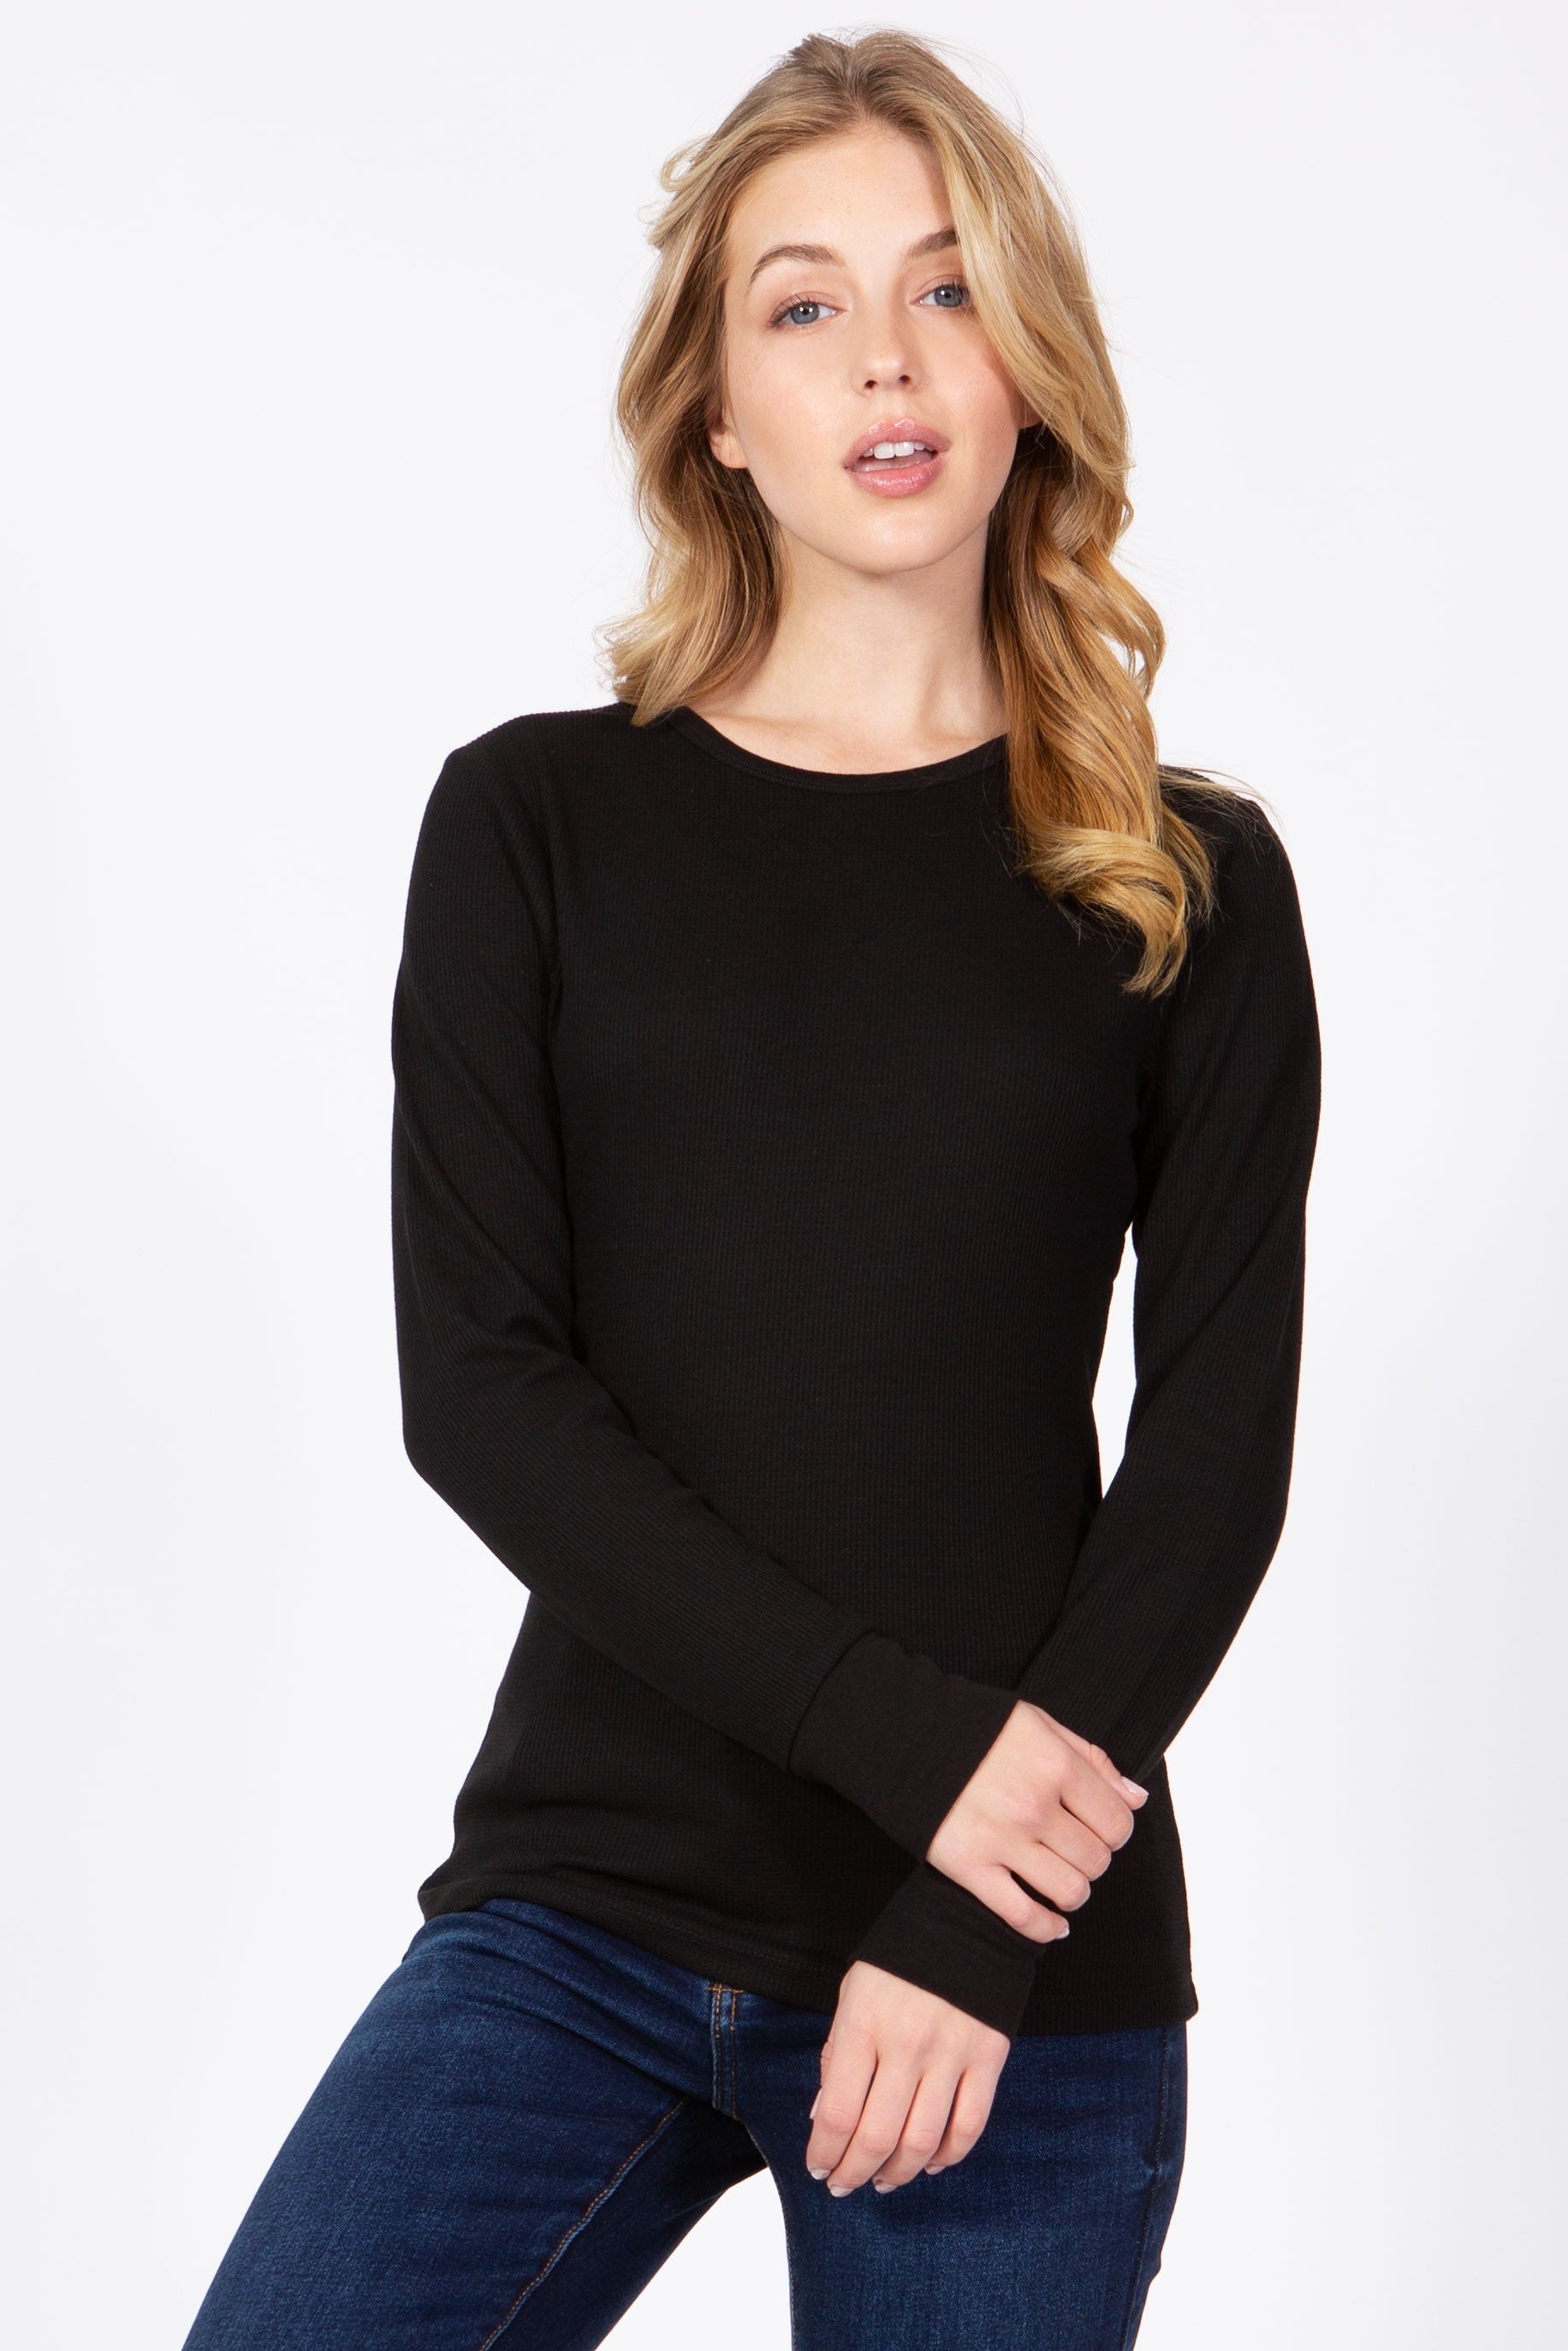 Long Sleeve Round Neck Thermal Top